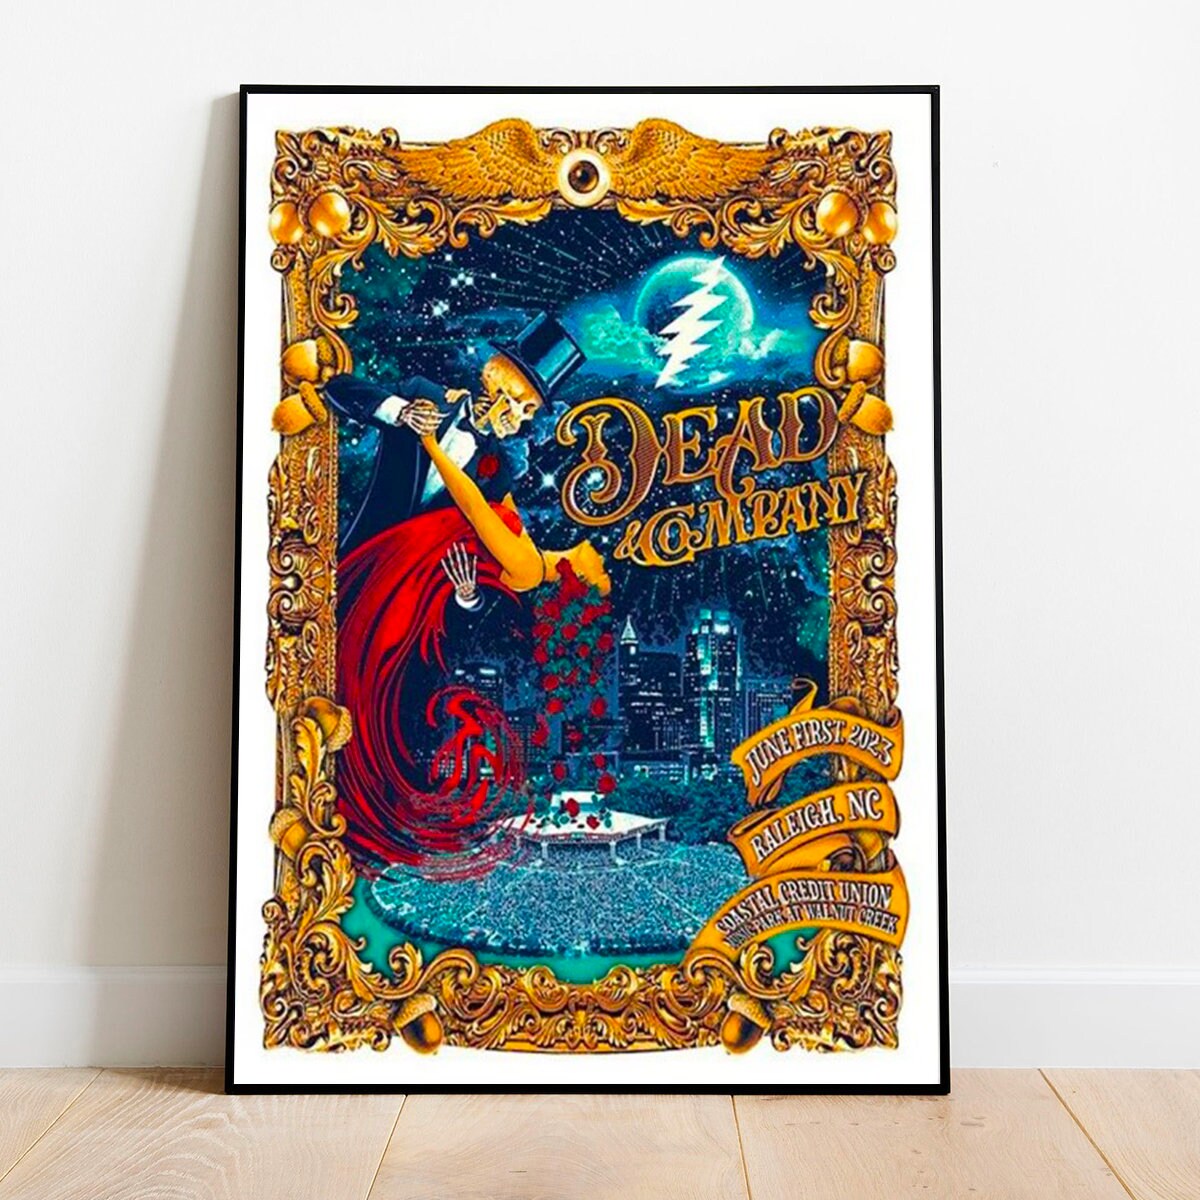 Discover The Final Tour Poster, Summer Tour Poster